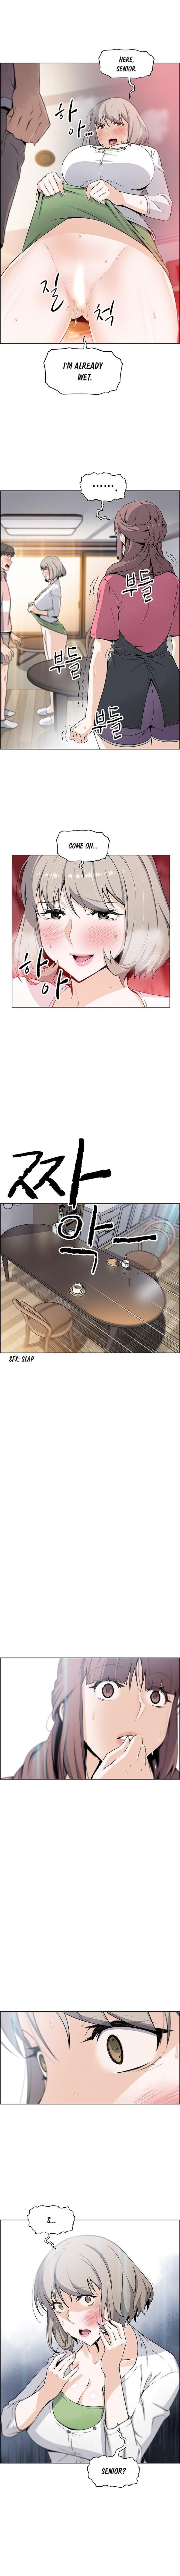 Housekeeper [Neck Pillow, Paper] Ch.49/49 [English] [Manhwa PDF] Completed 289